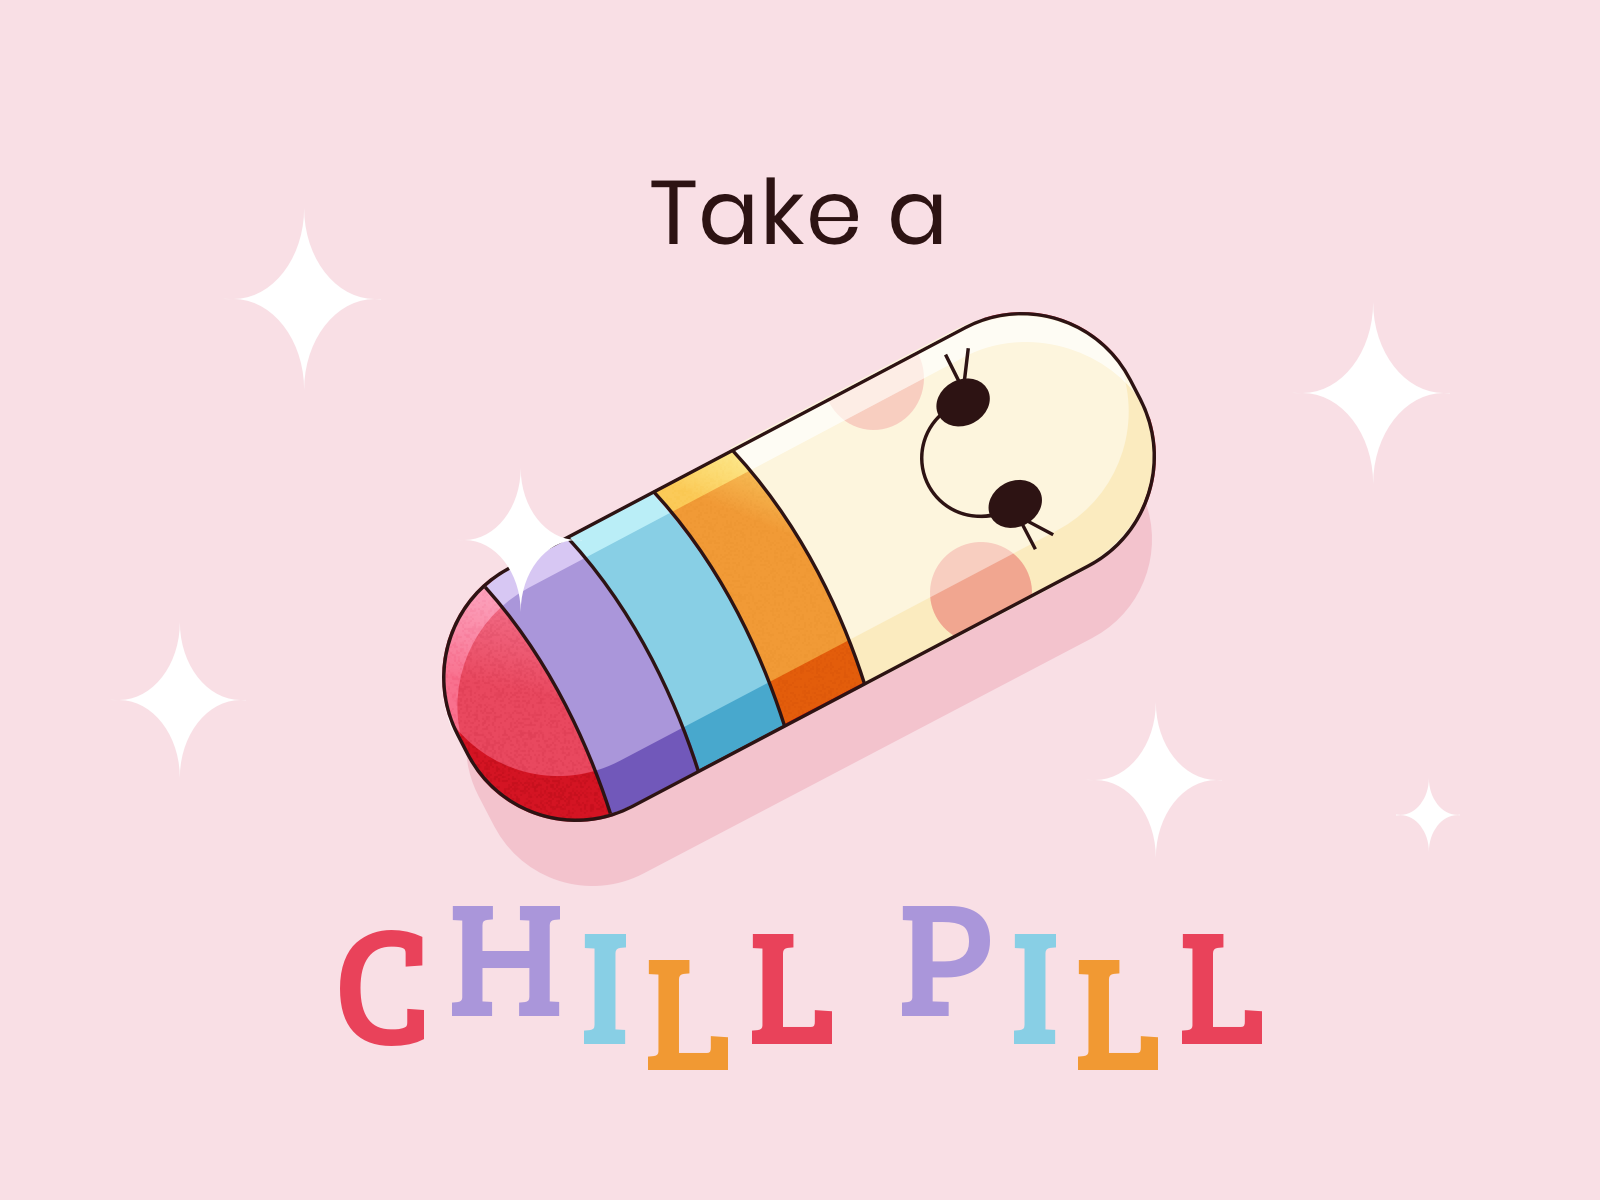 Take a chill pill 💜 by Tasneem Ibrahim on Dribbble